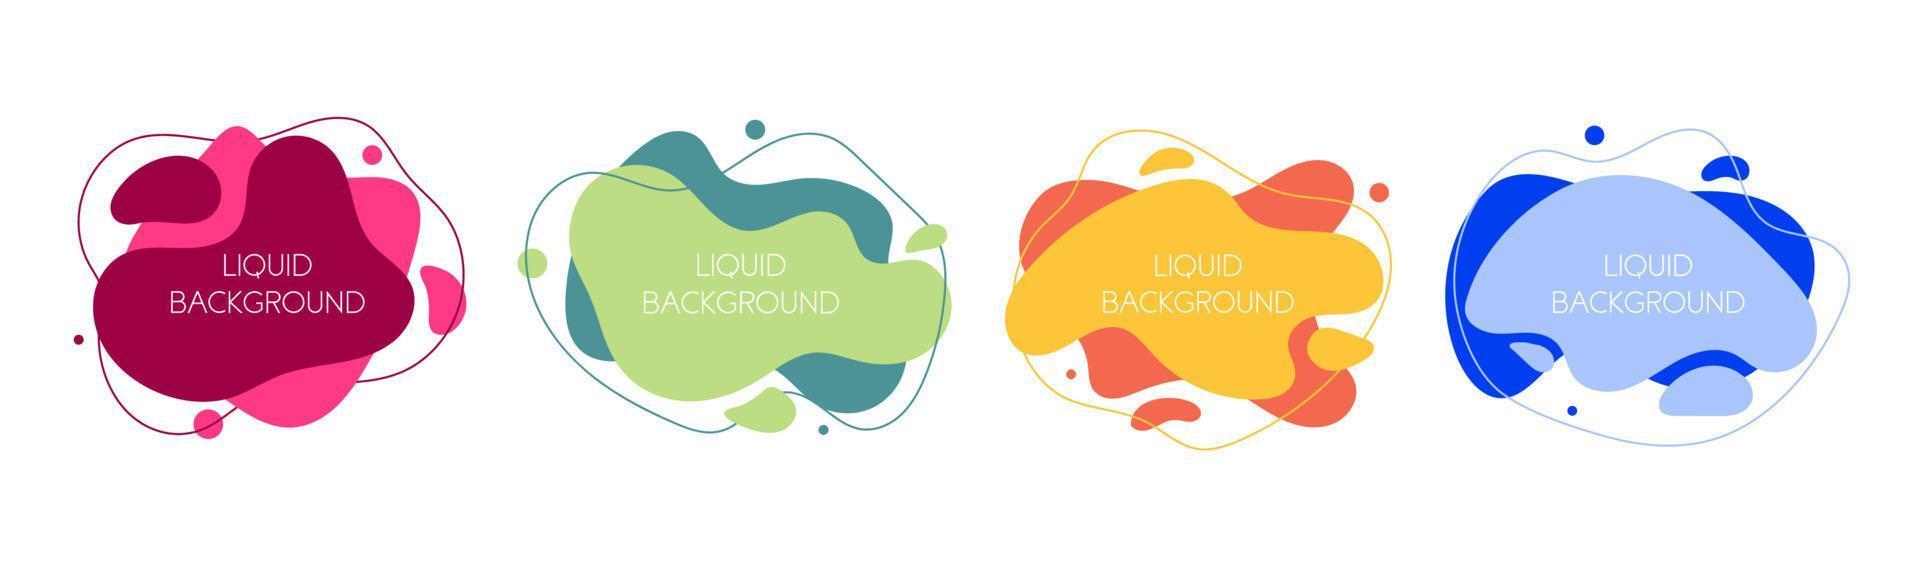 Set of 4 abstract modern graphic liquid elements. Dynamical waves different colored fluid forms. Isolated banners with flowing liquid shapes. Template for the design of a logo, flyer or presentation. vector